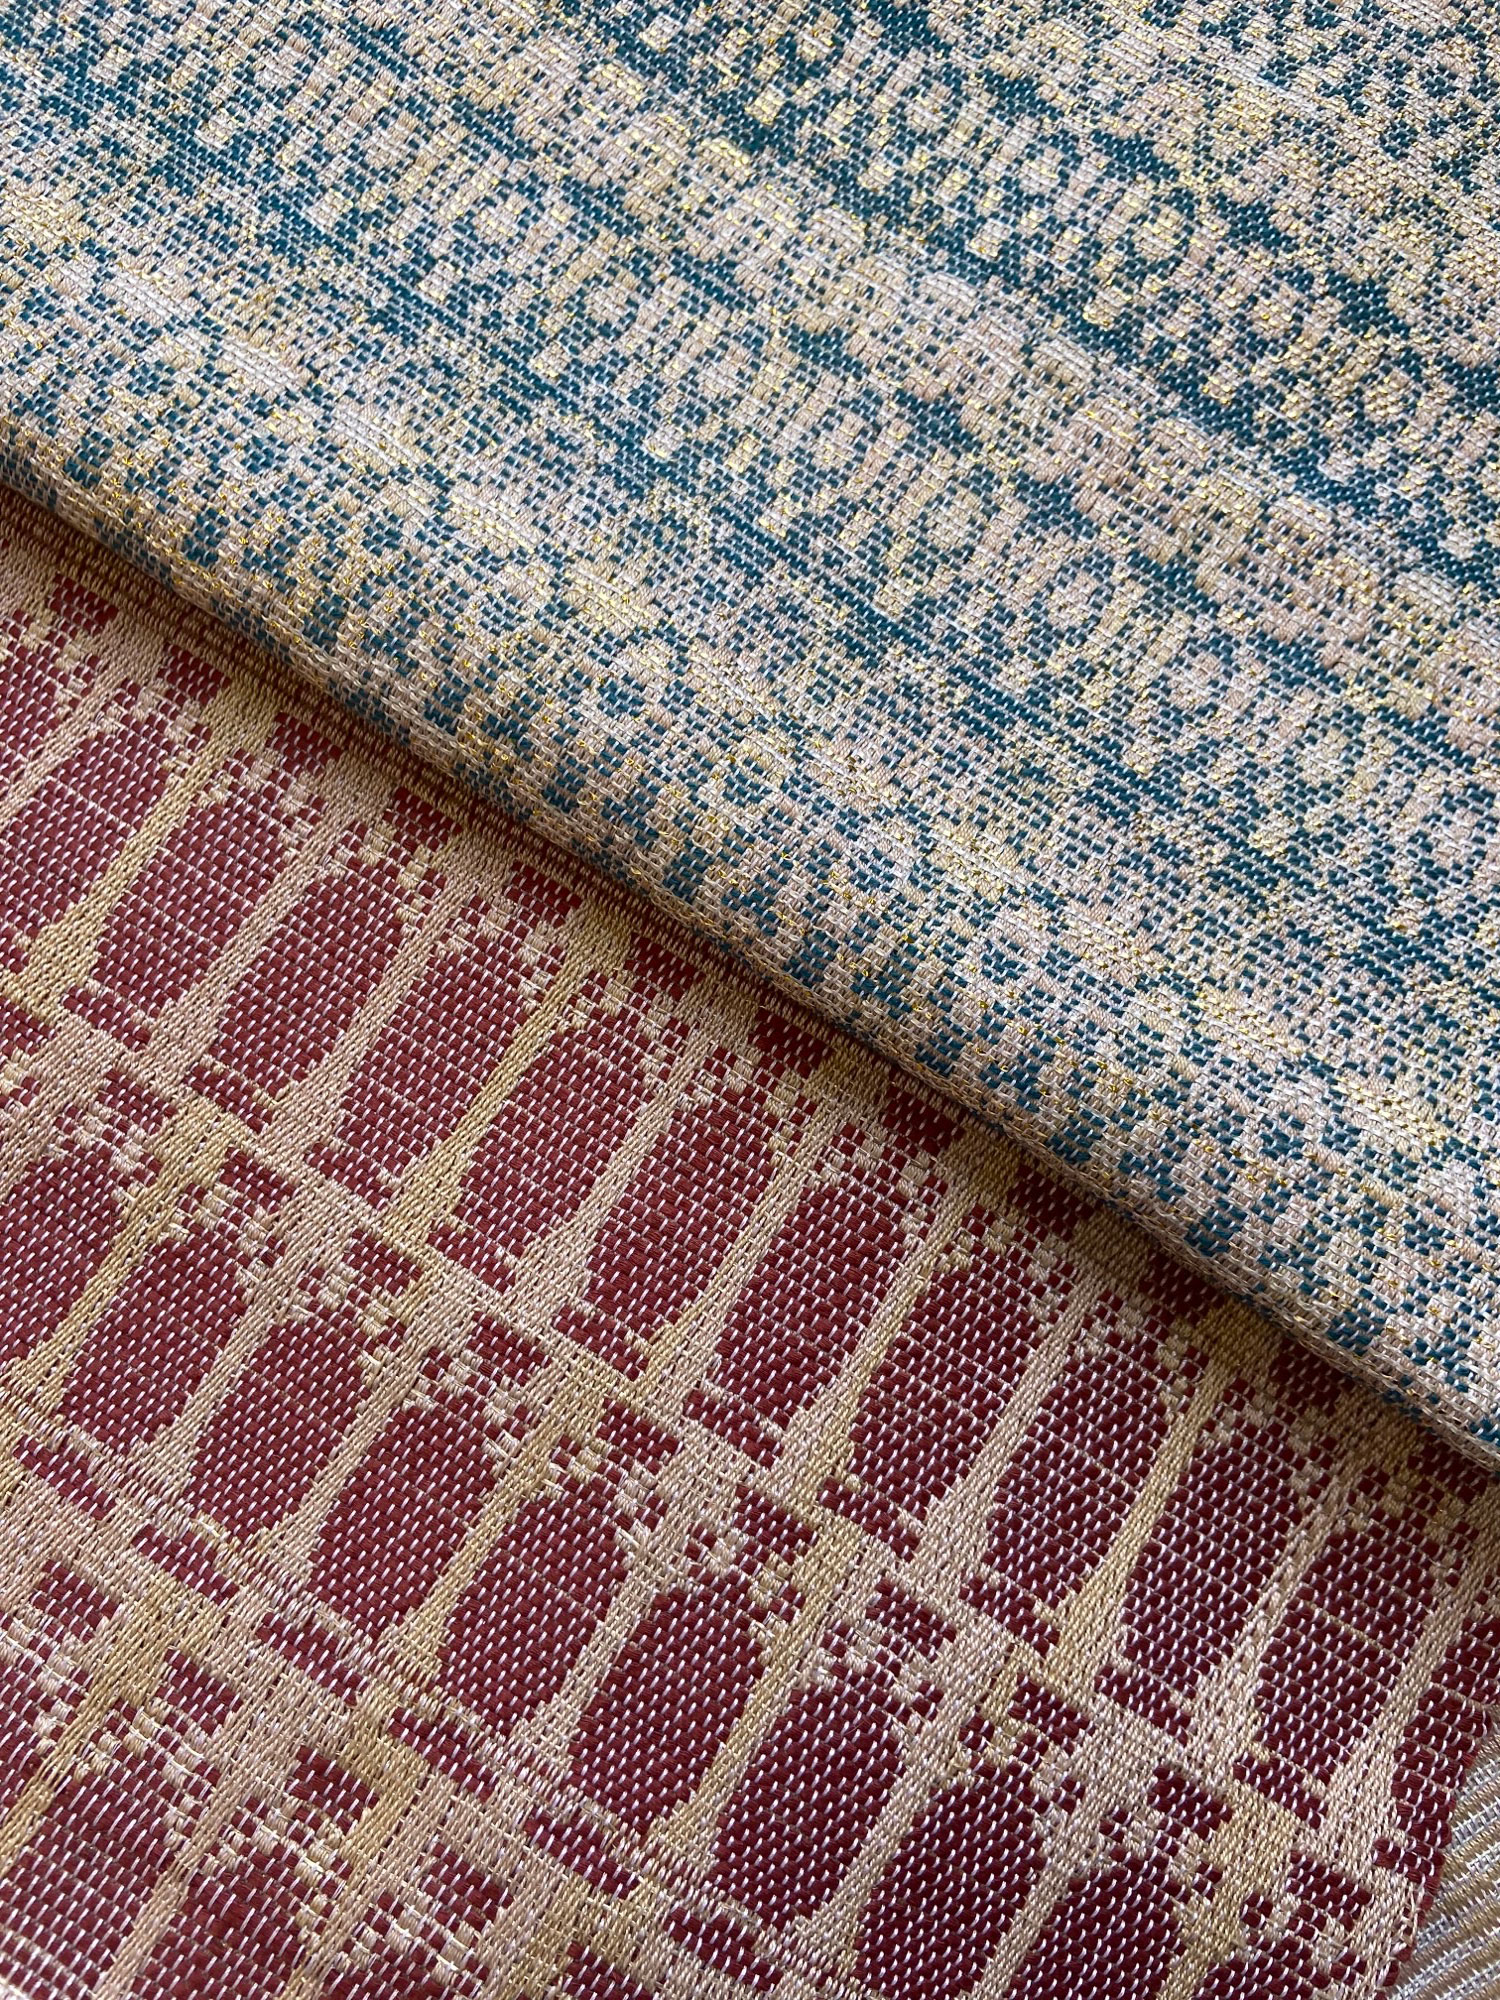 Close up of two woven samples, made with cotton and linen.